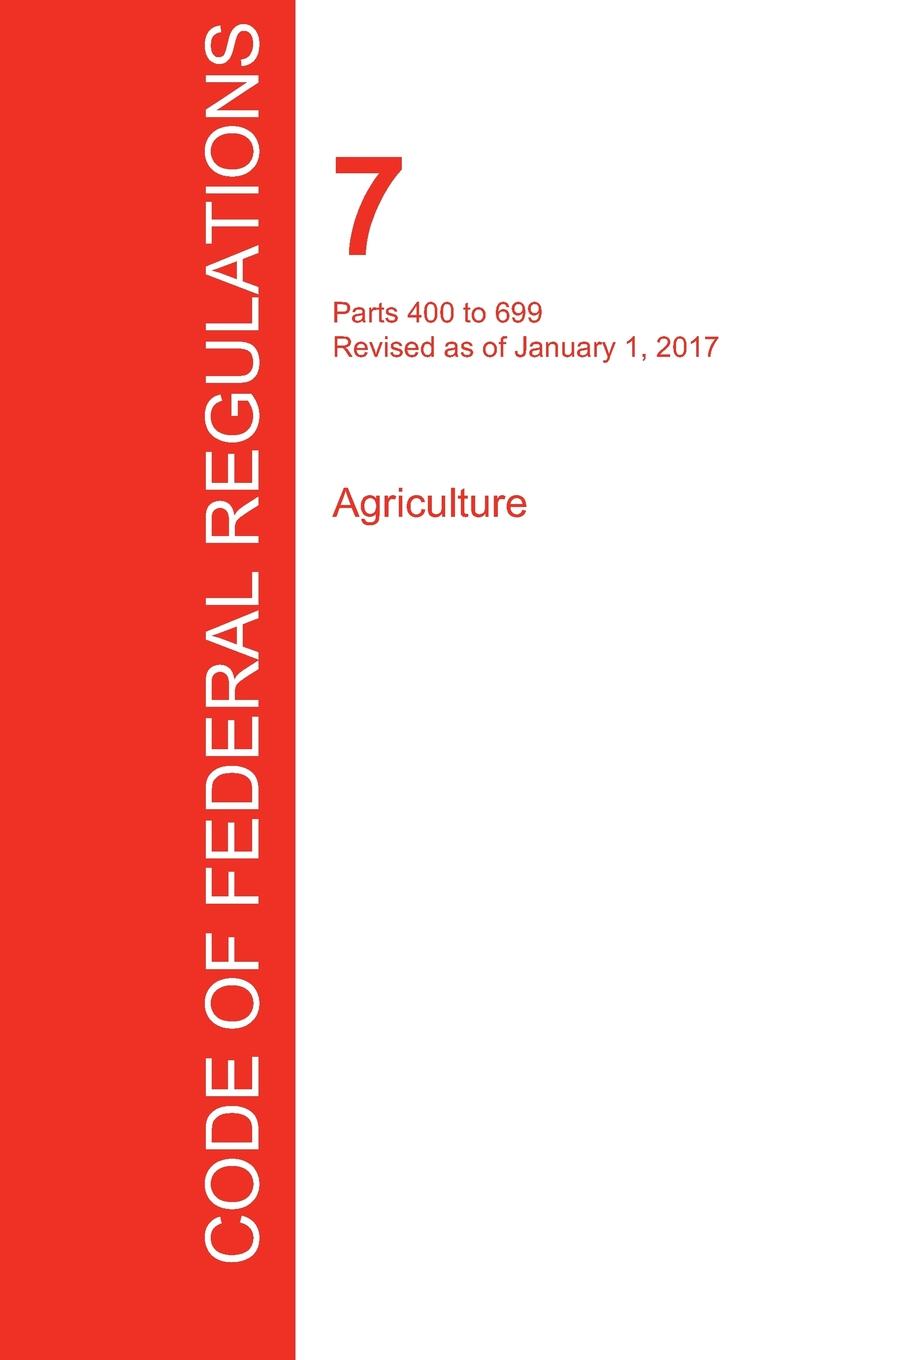 фото CFR 7, Parts 400 to 699, Agriculture, January 01, 2017 (Volume 6 of 15)